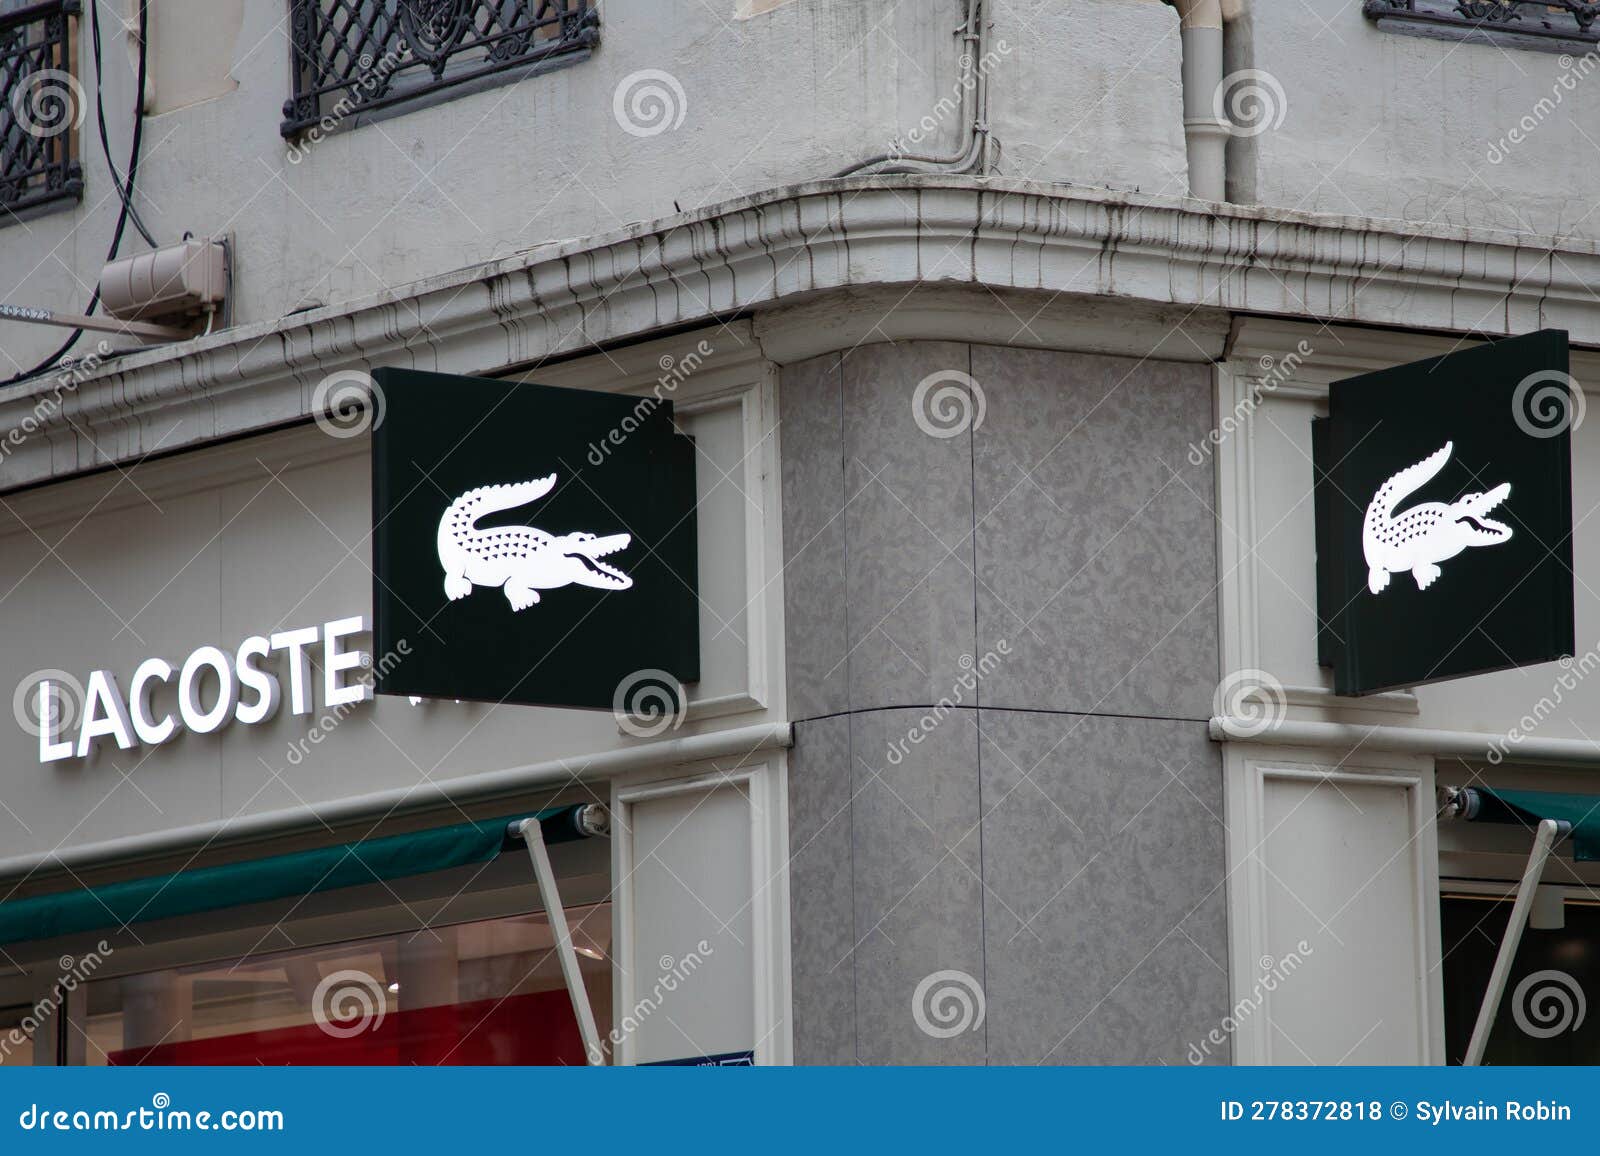 Lacoste Sign Text and Logo Brand on Wall Facade Entrance on Fashion ...